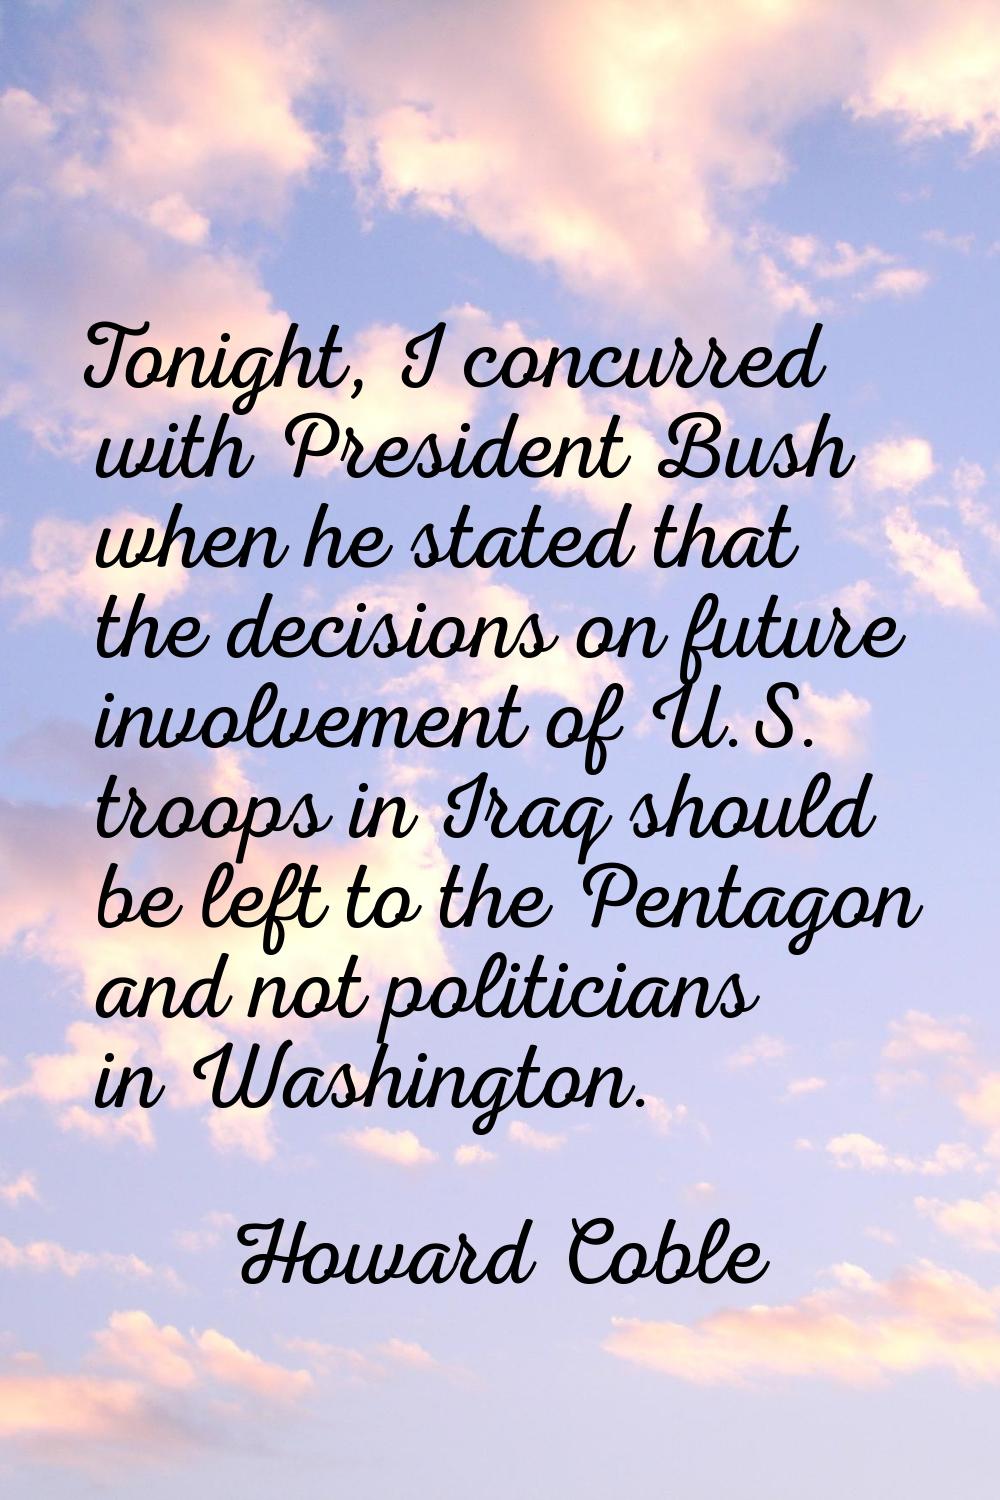 Tonight, I concurred with President Bush when he stated that the decisions on future involvement of